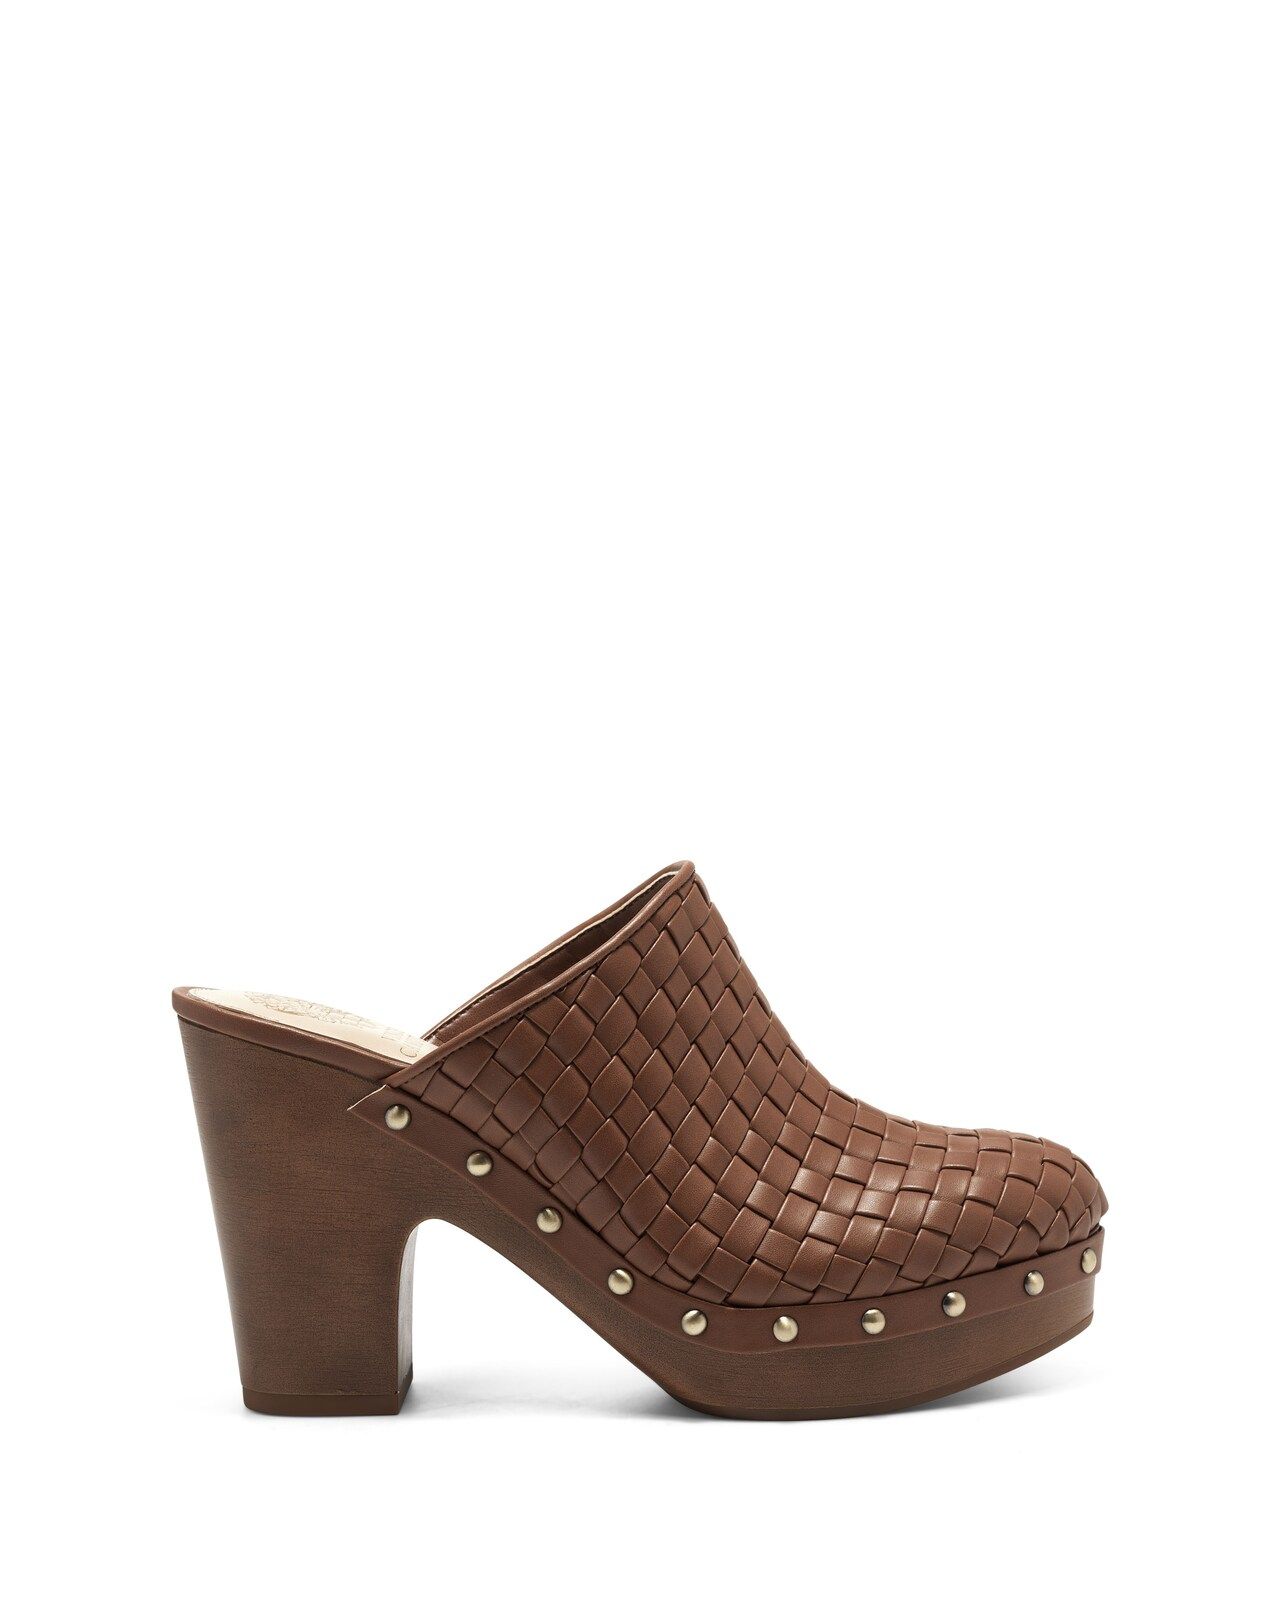 Cindell Woven Clog | Vince Camuto